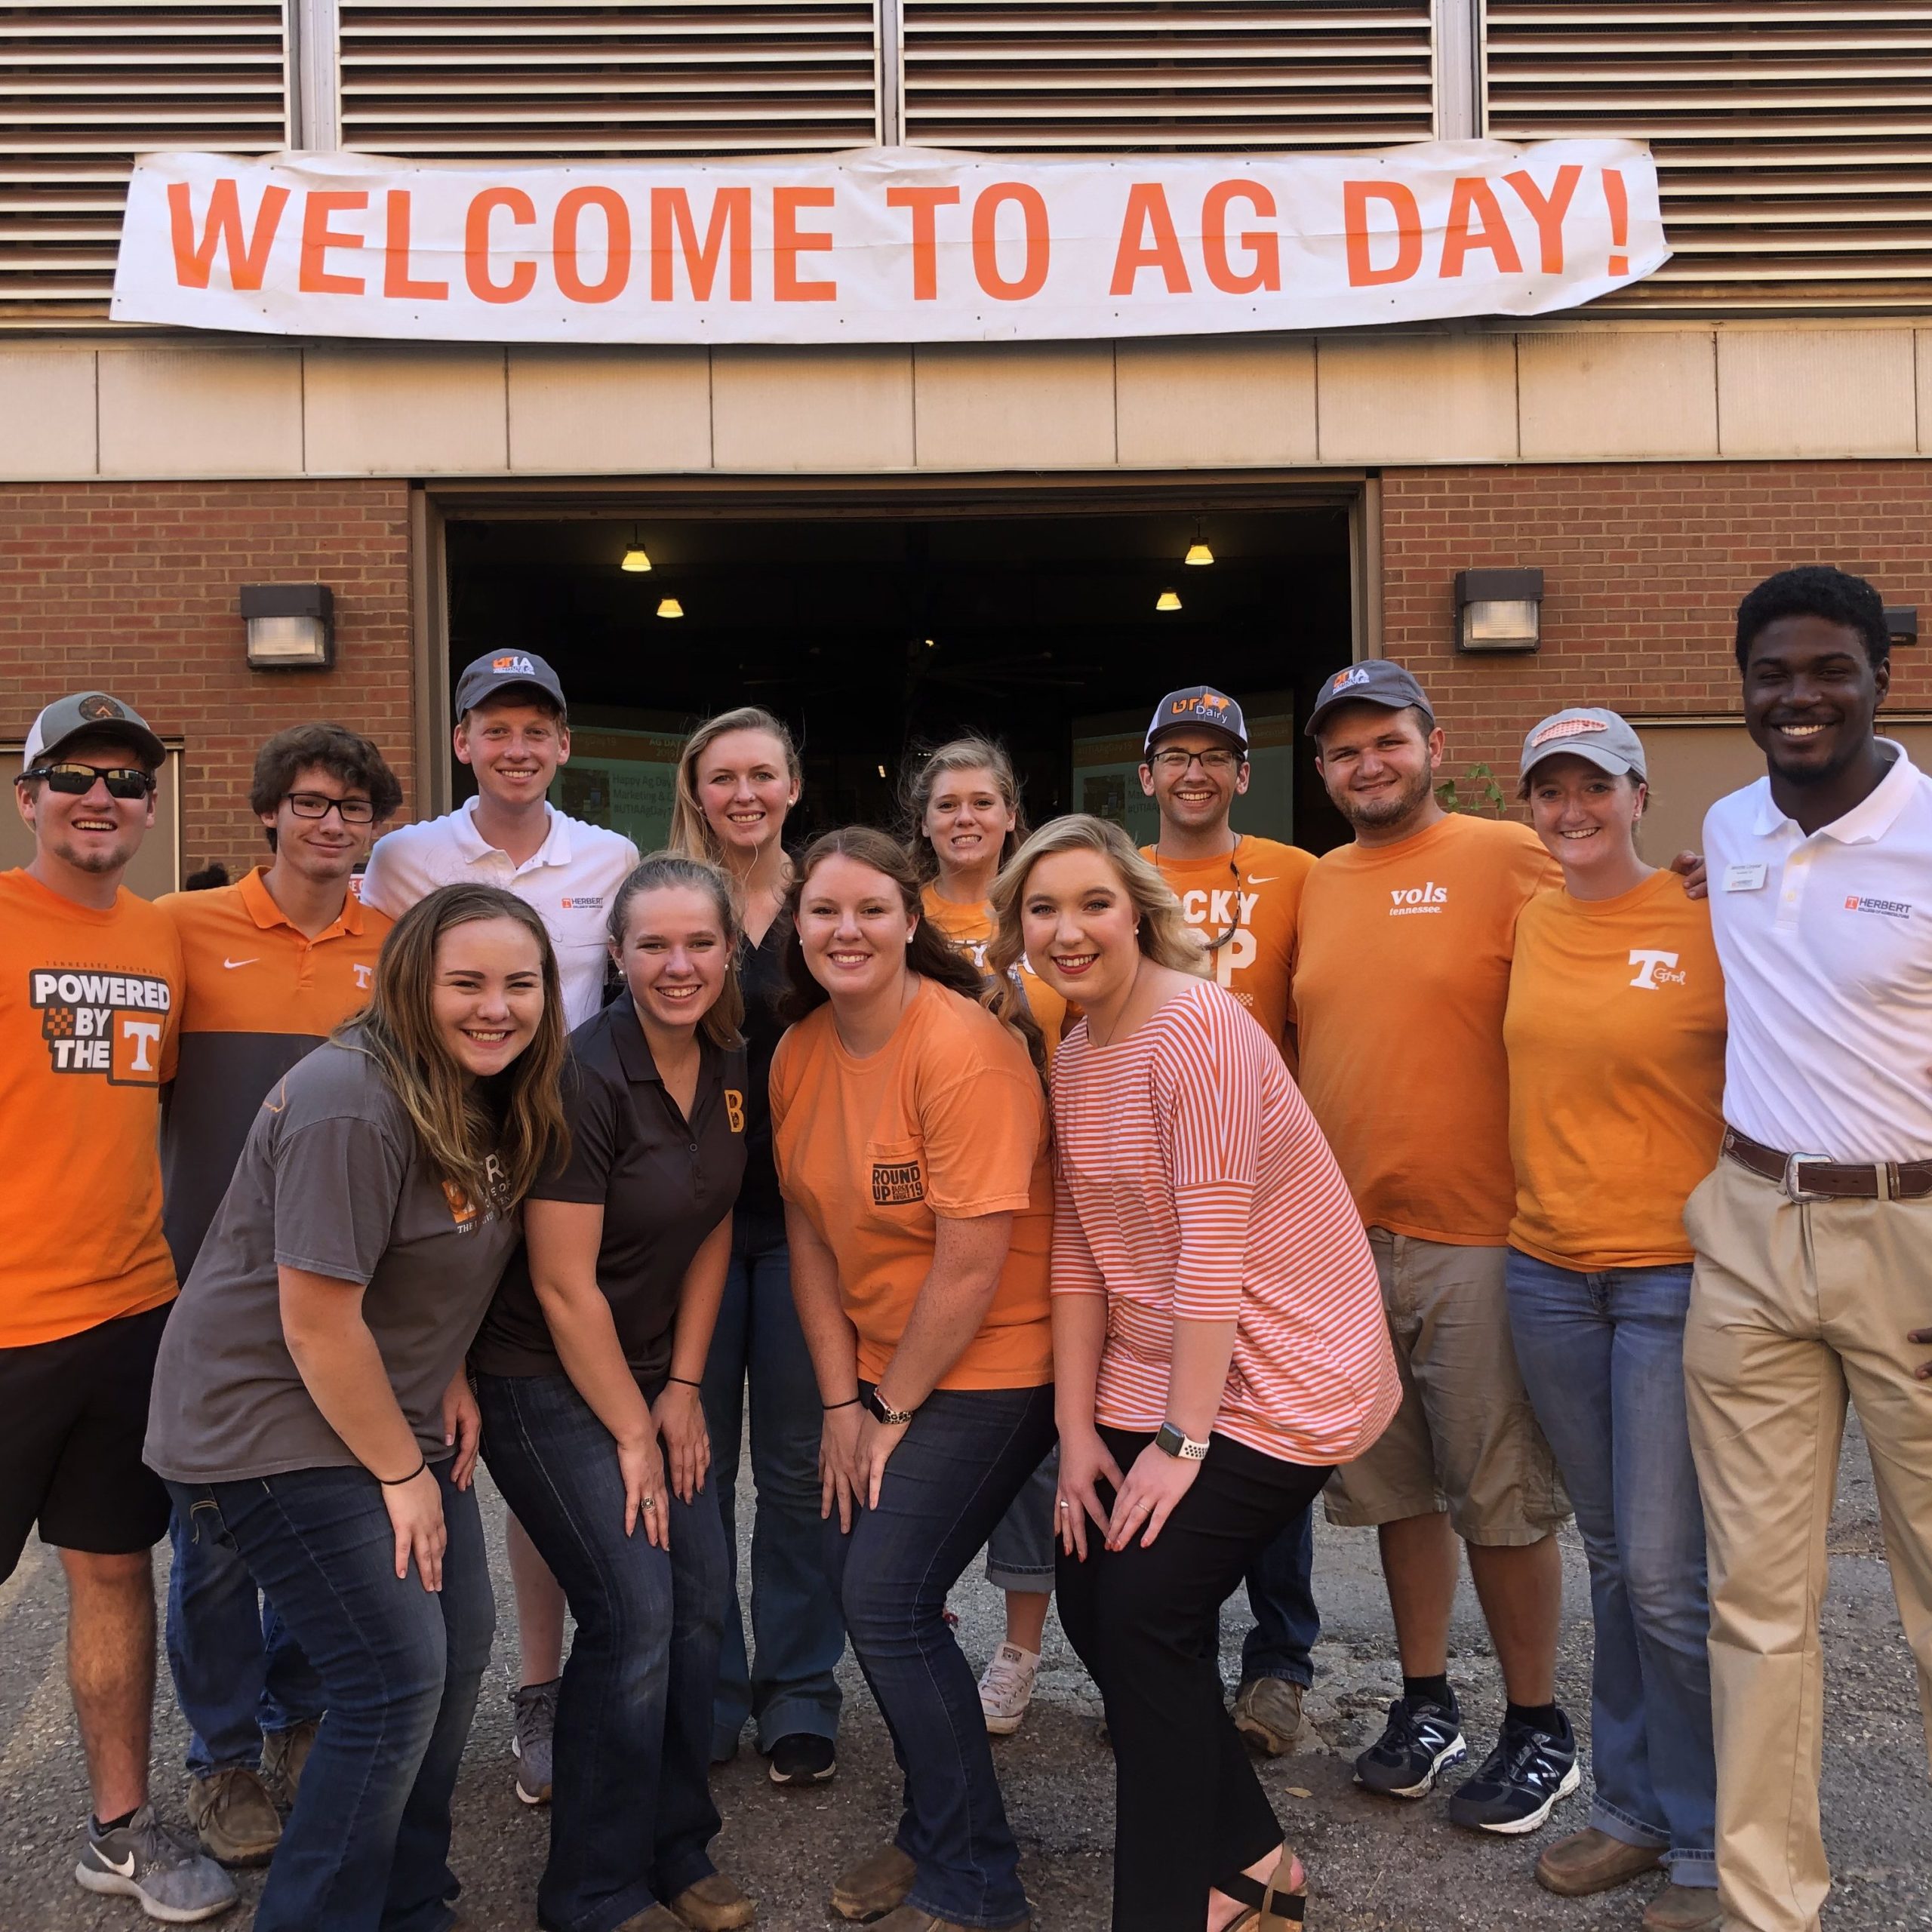 Students gathered in front of Brehm for Ag Day 